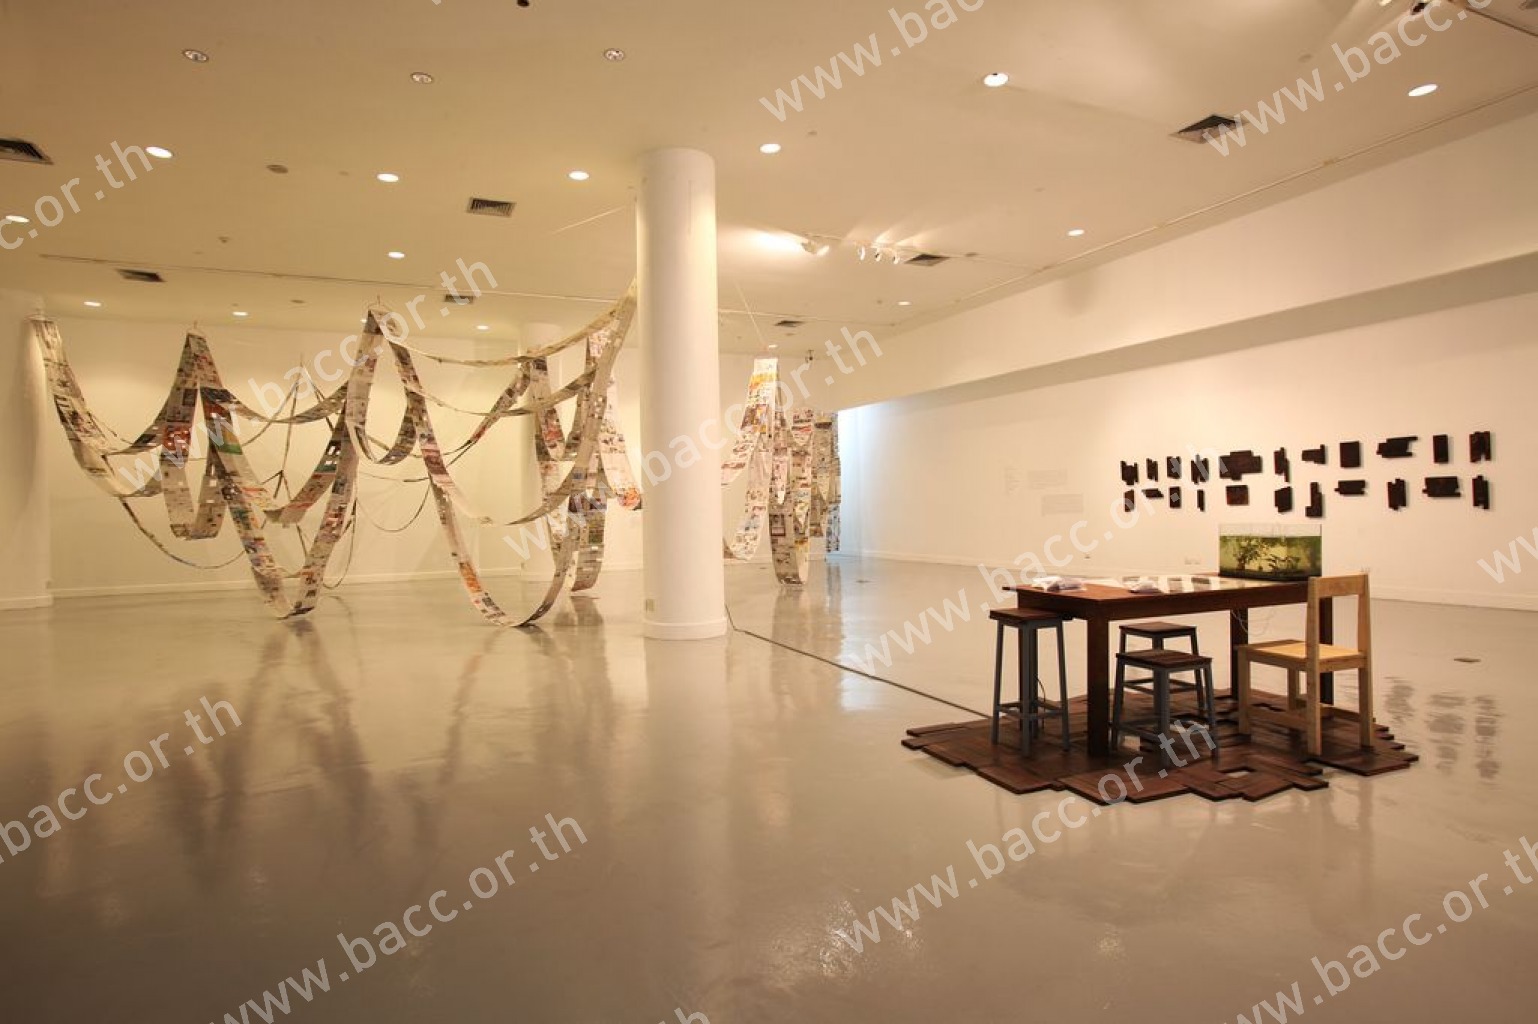 Re-ทิ้ง (Re-Think): Art Exhibition for Reduce “Waste” Renew “Think”